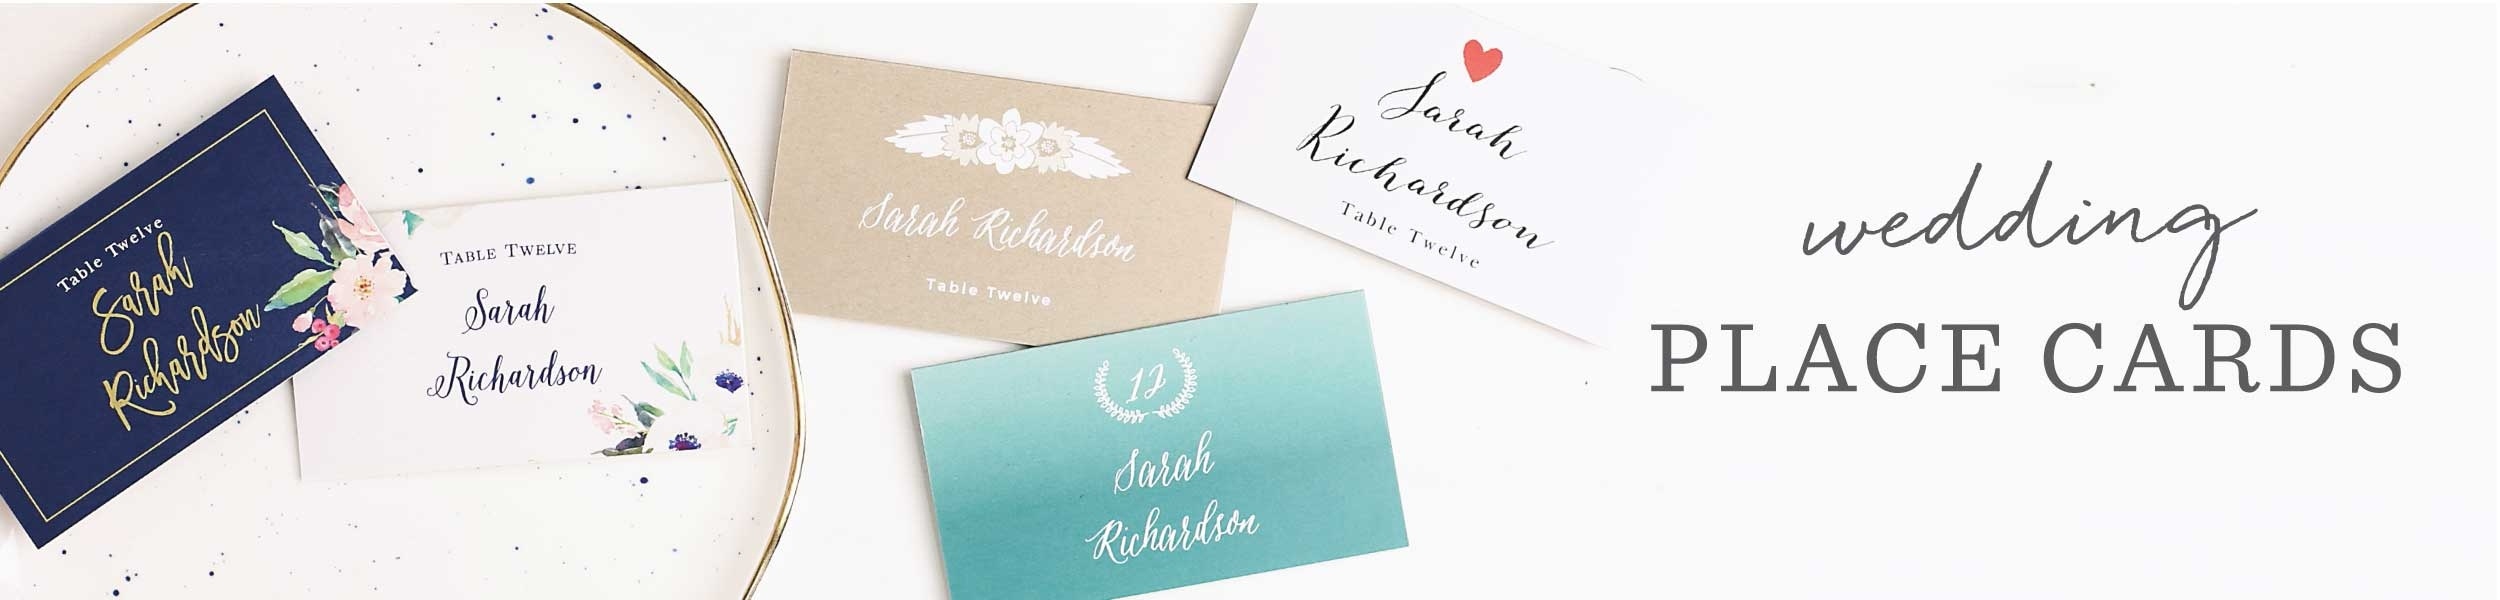 Wedding Place Cards | Free Guest Name Printing! - Basic Invite - Free Printable Damask Place Cards